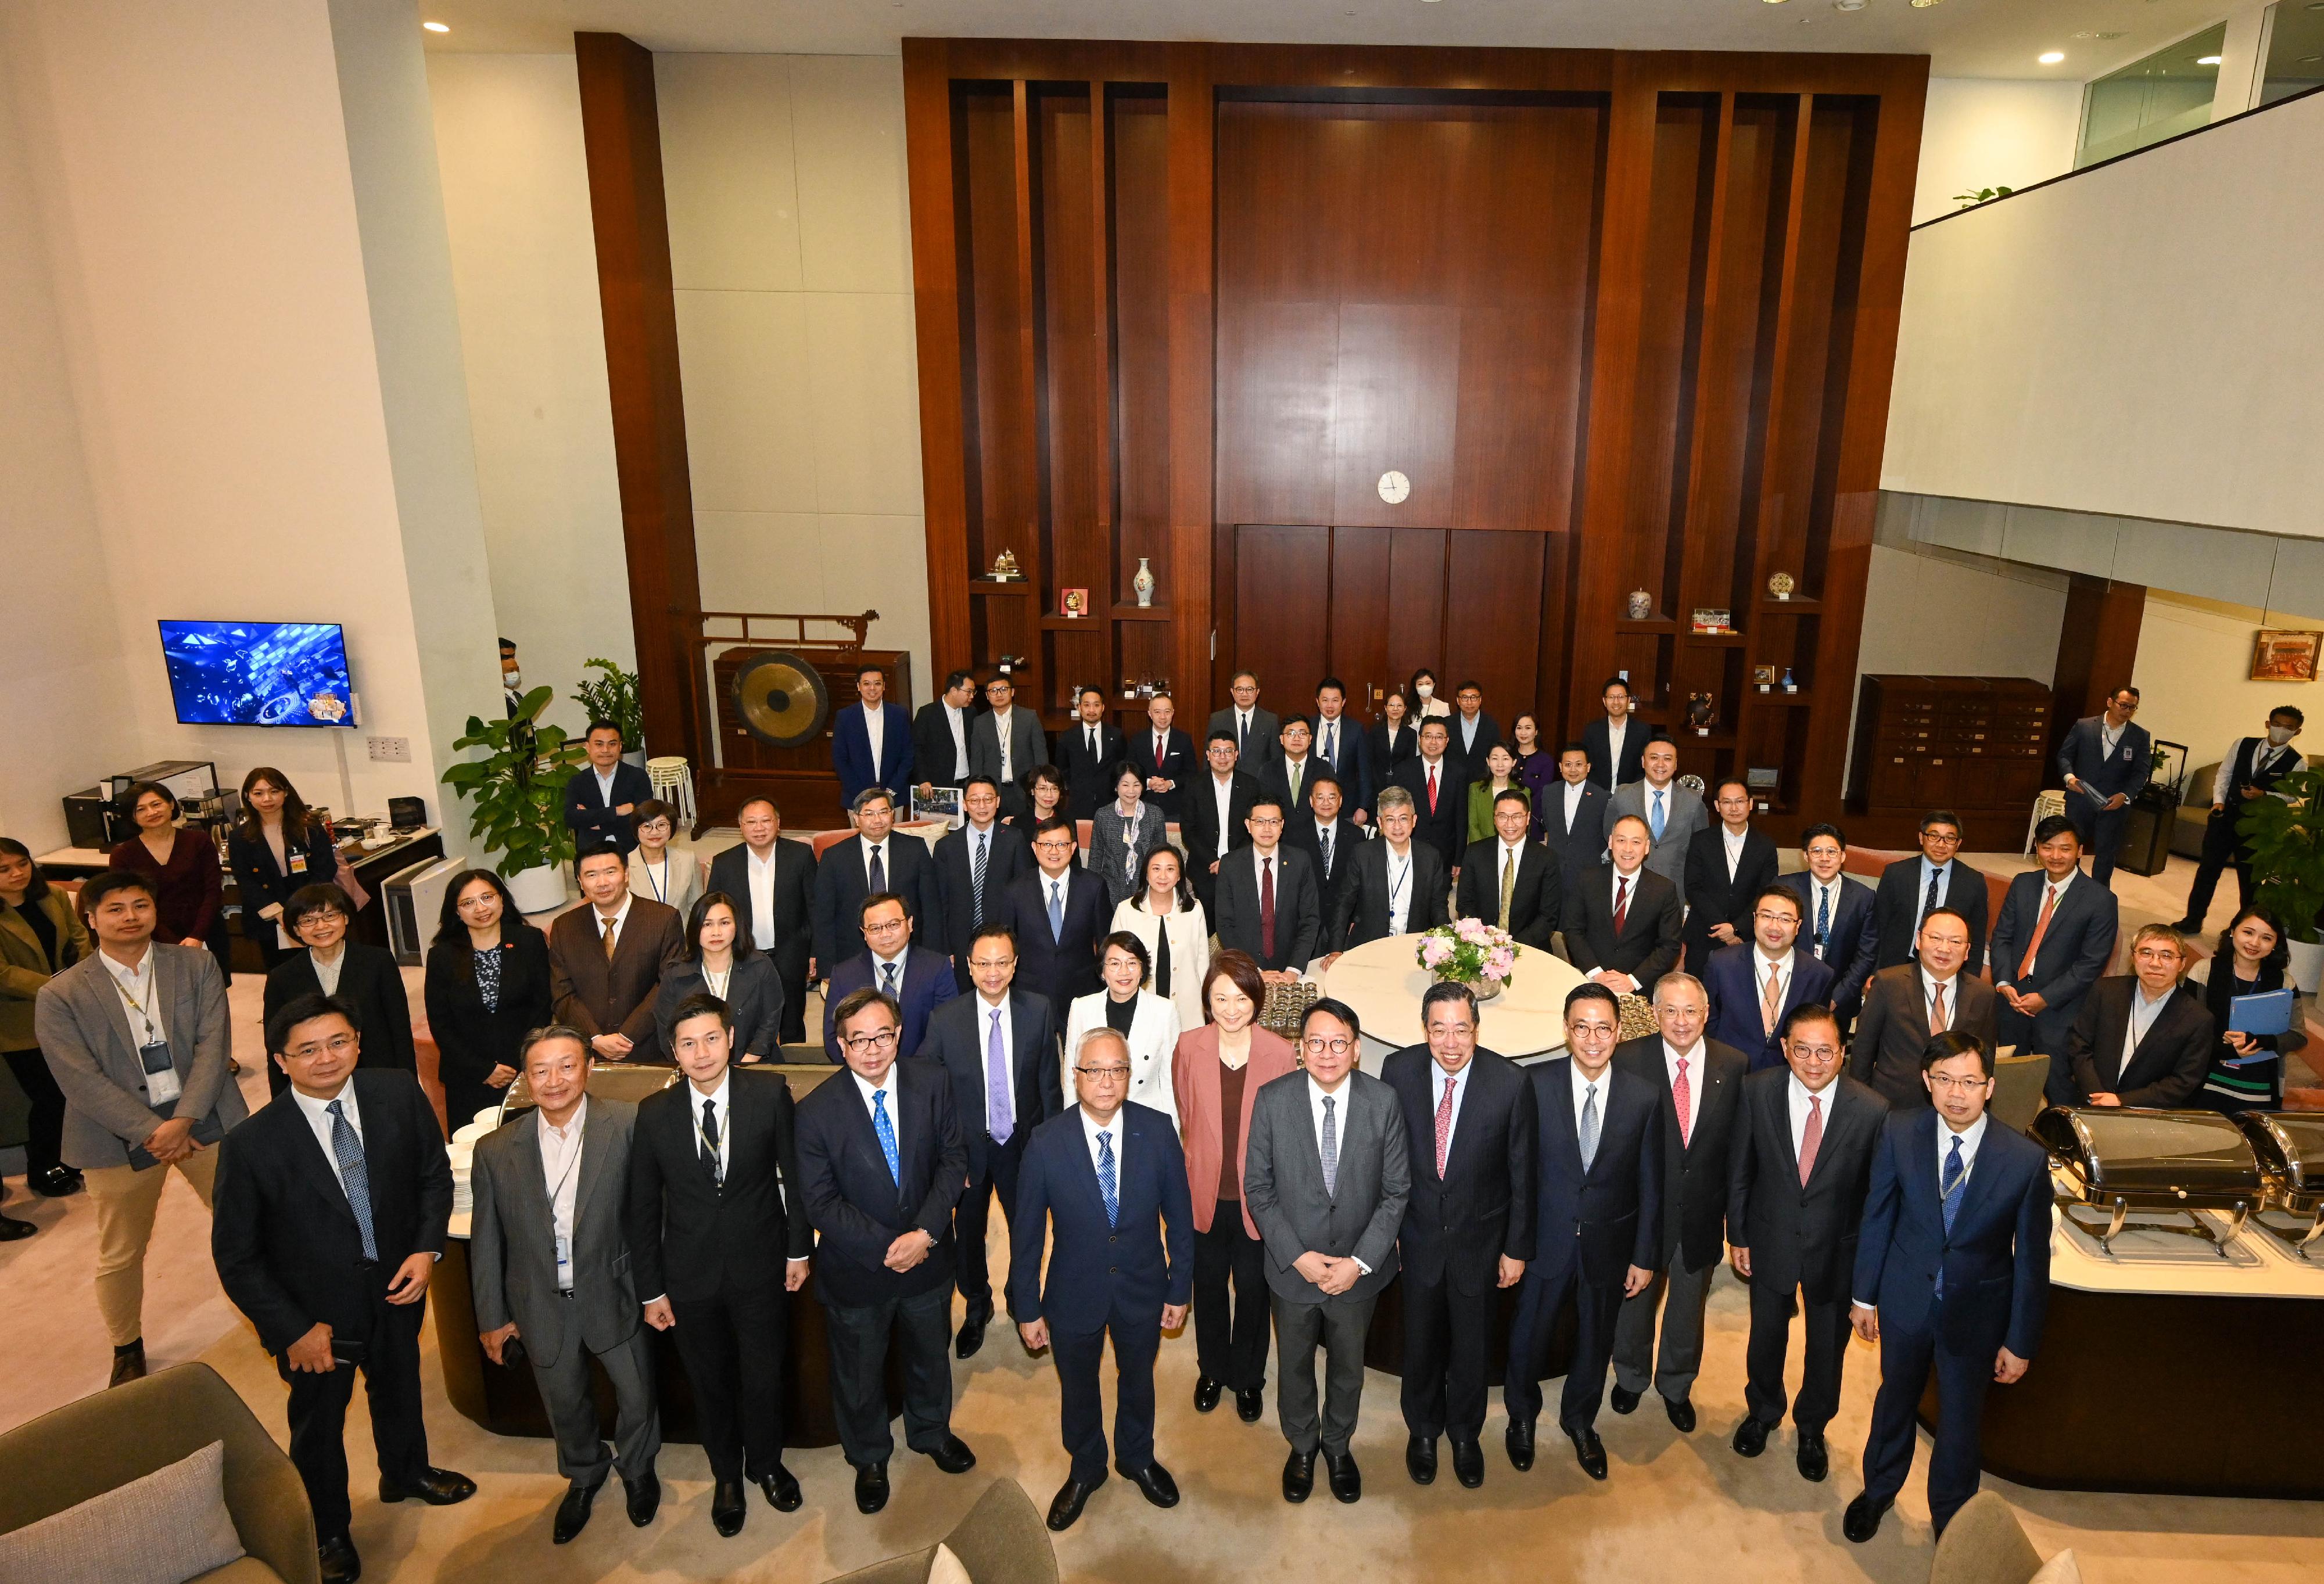 The Chief Secretary for Administration, Mr Chan Kwok-ki, attended the Ante Chamber exchange session at the Legislative Council (LegCo) today (March 22). Photo shows Mr Chan (first row, sixth right); the President of the LegCo, Mr Andrew Leung (first row, fifth right); the Secretary for Culture, Sports and Tourism, Mr Kevin Yeung (first row, fourth right); the Secretary for Environment and Ecology, Mr Tse Chin-wan (first row, seventh right), with LegCo Members before the meeting.